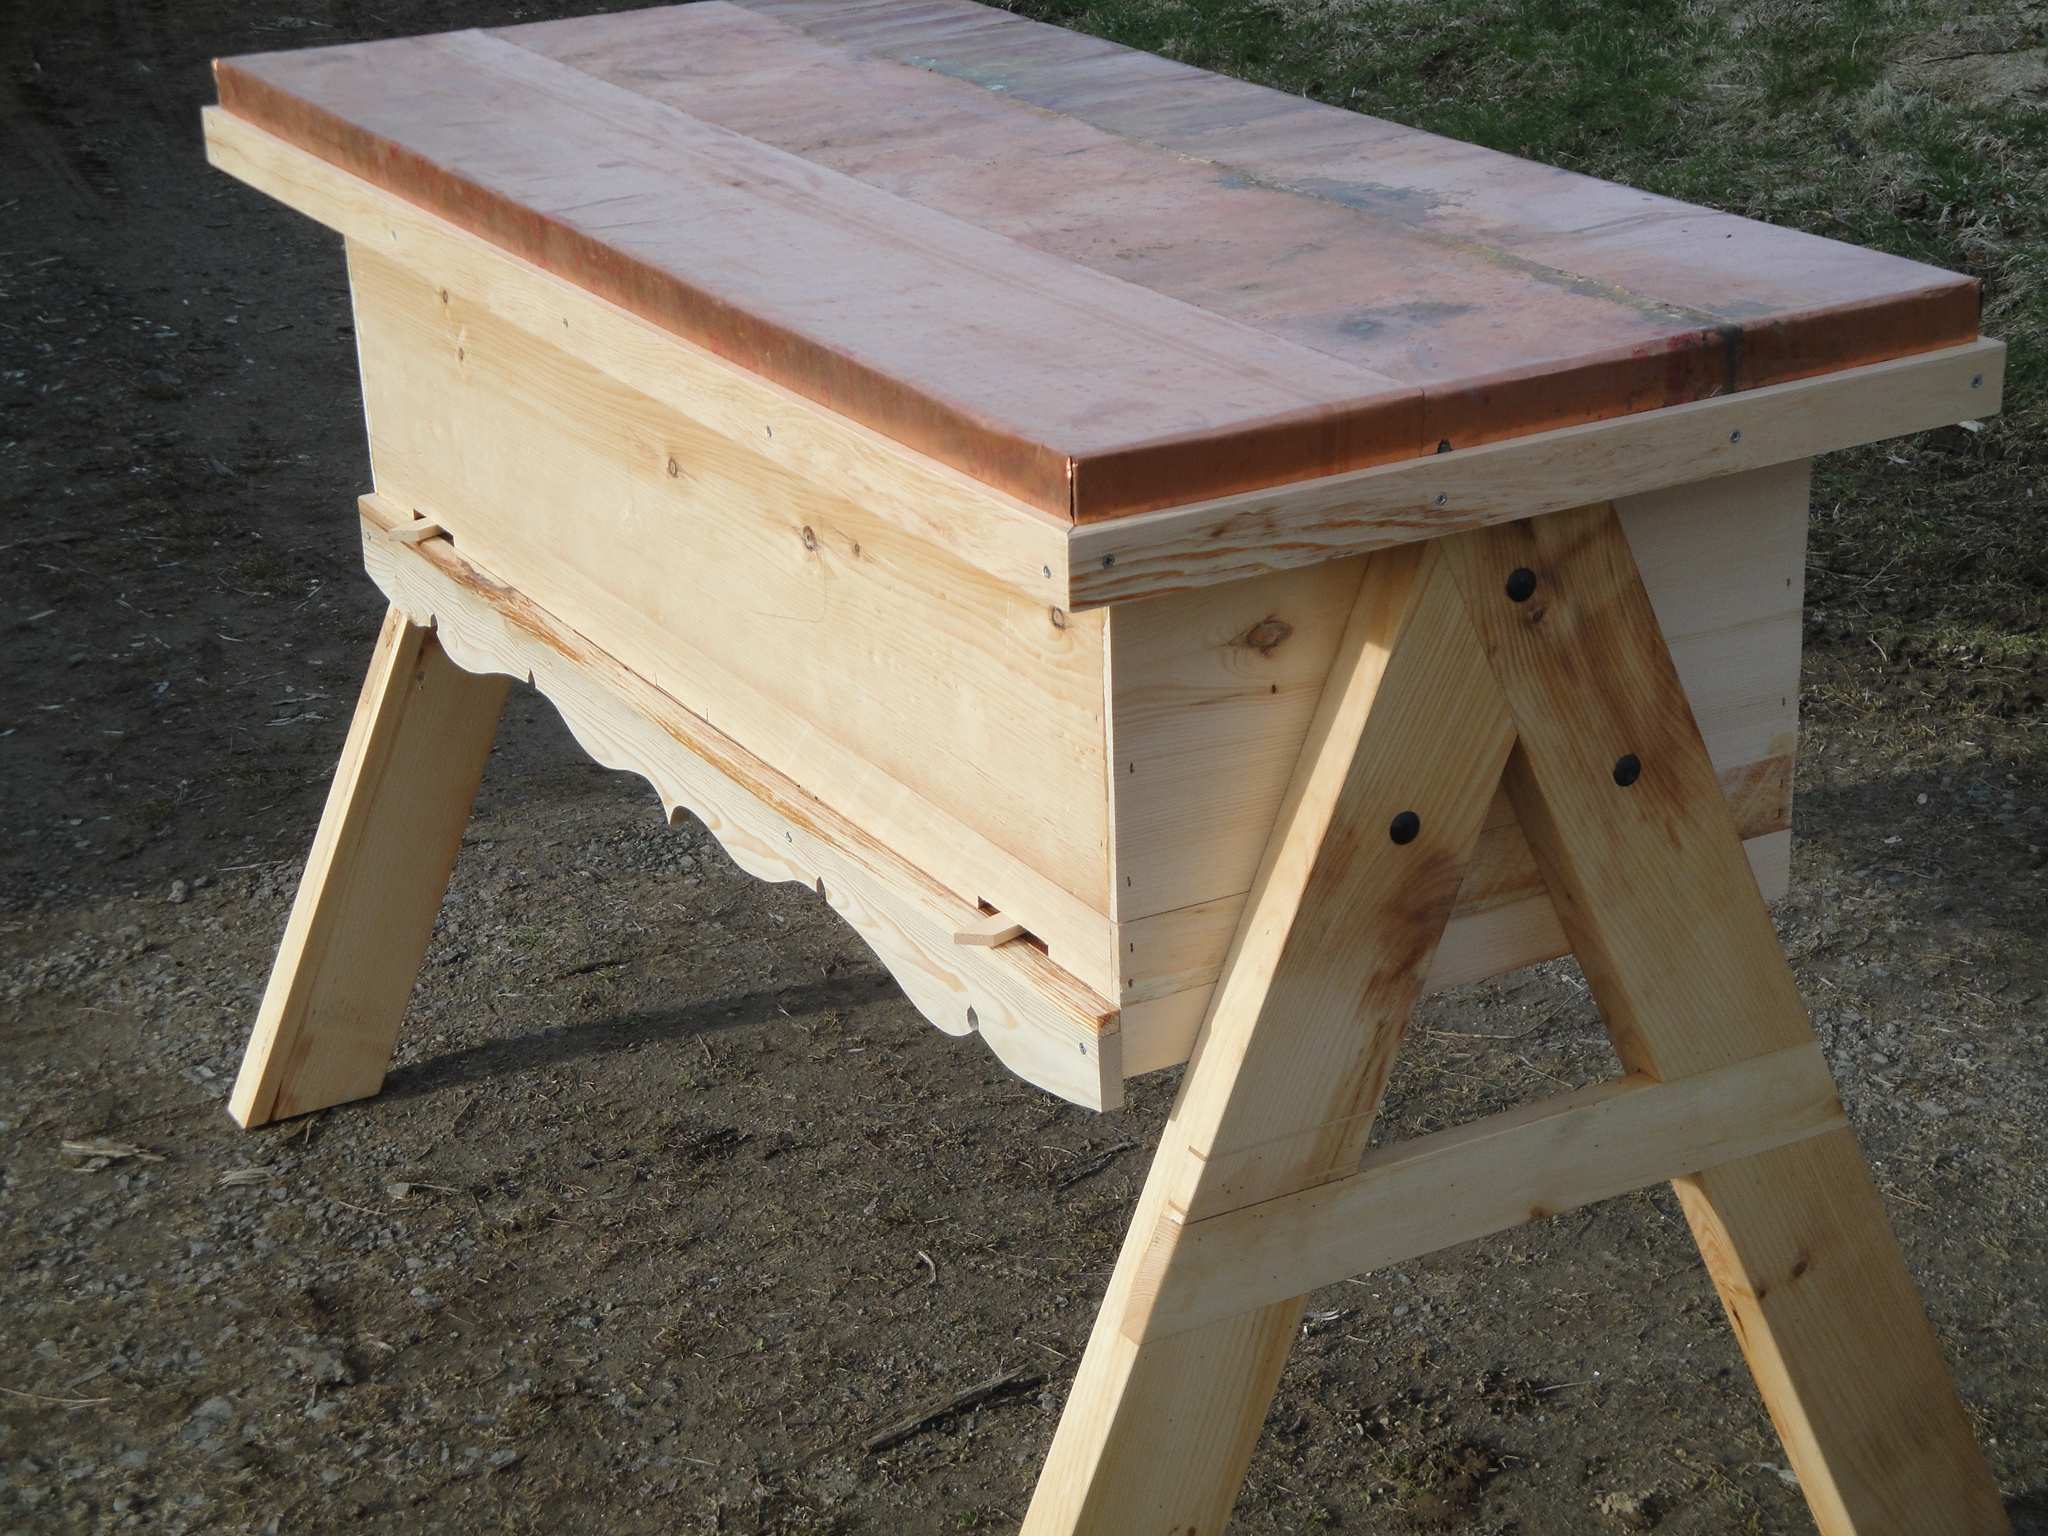  Honeybees and the Langpohl Top Bar Hive Design | its the bees knees